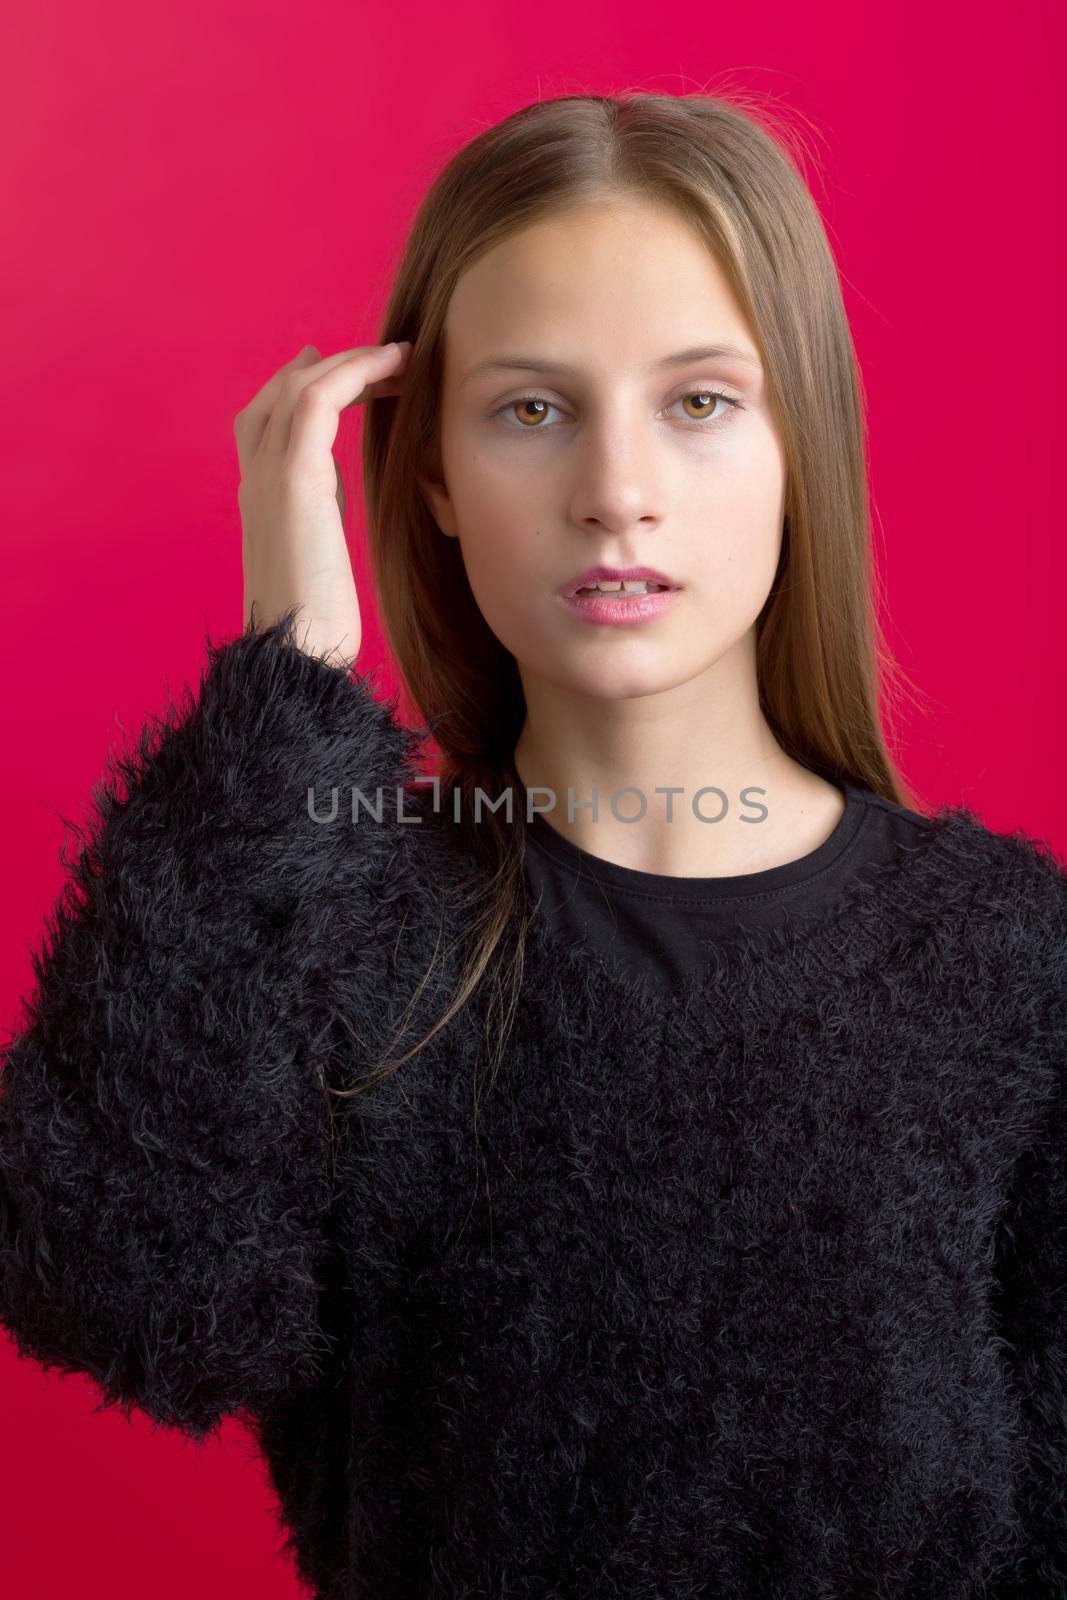 Beautiful teenage girl touching her long hair. Portrait of charming smiling teenager wearing black stylish oversized sweater with leather belt standing on red background